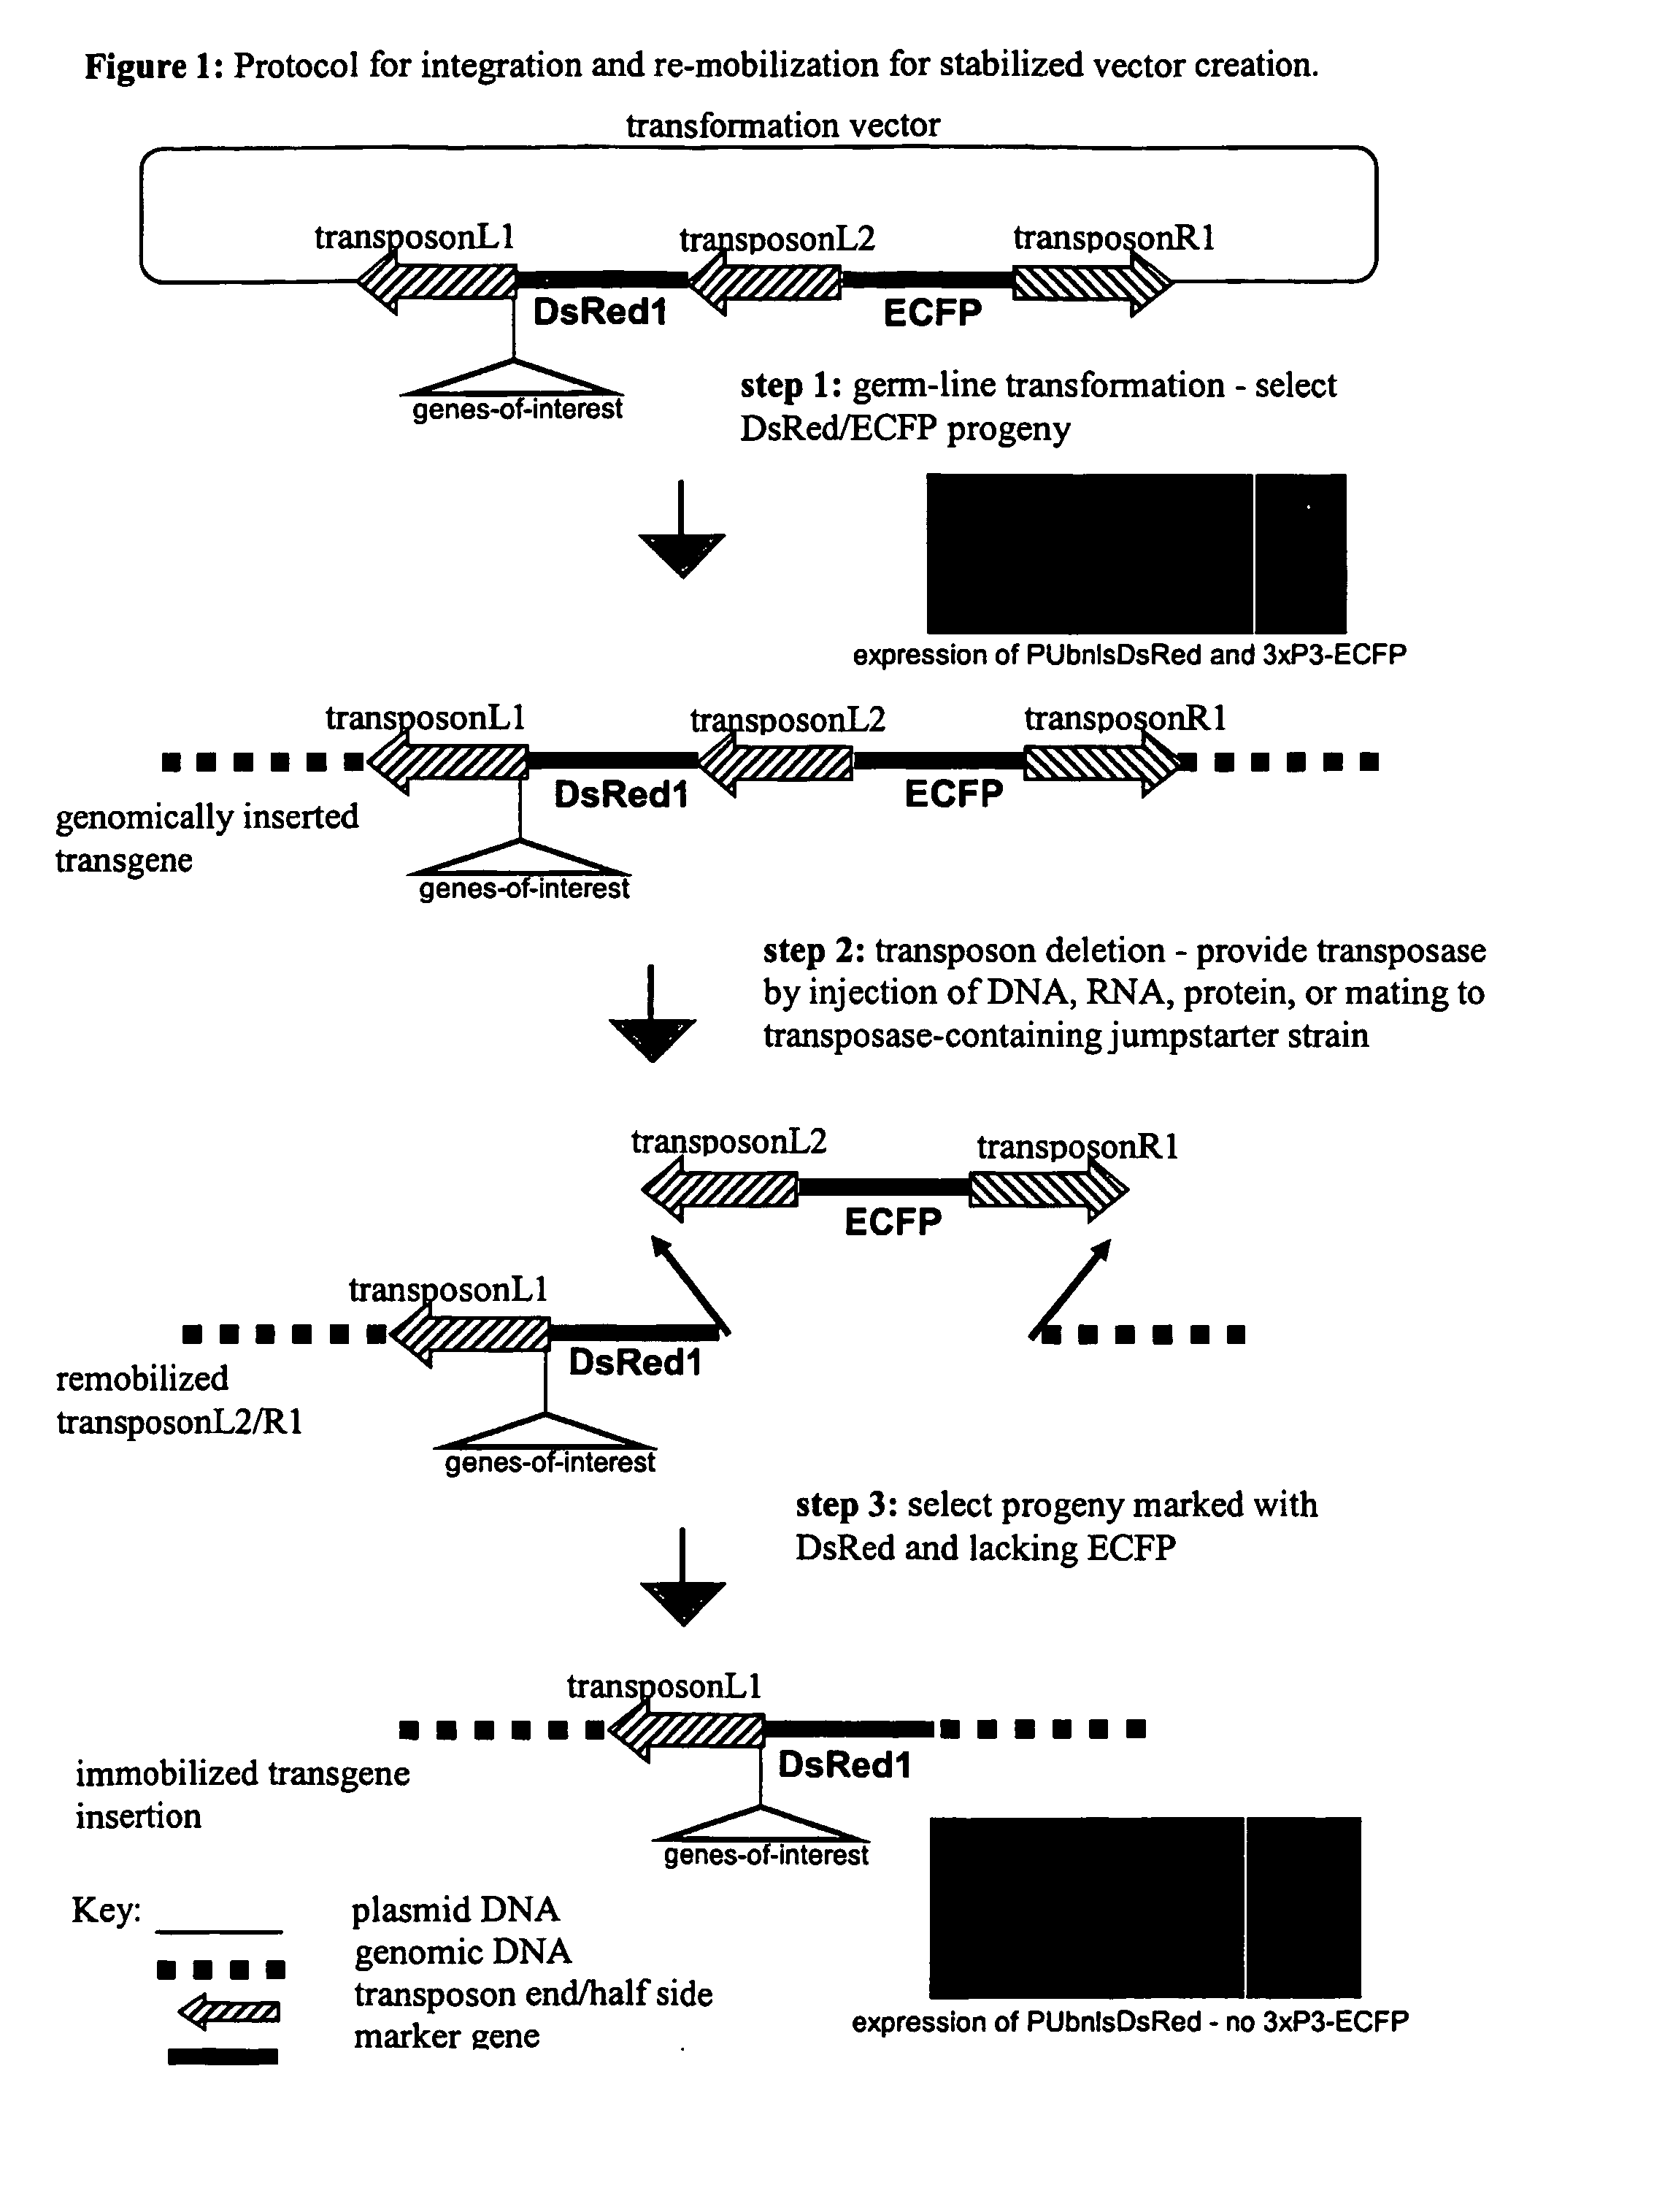 System for gene targeting and producing stable genomic transgene insertions